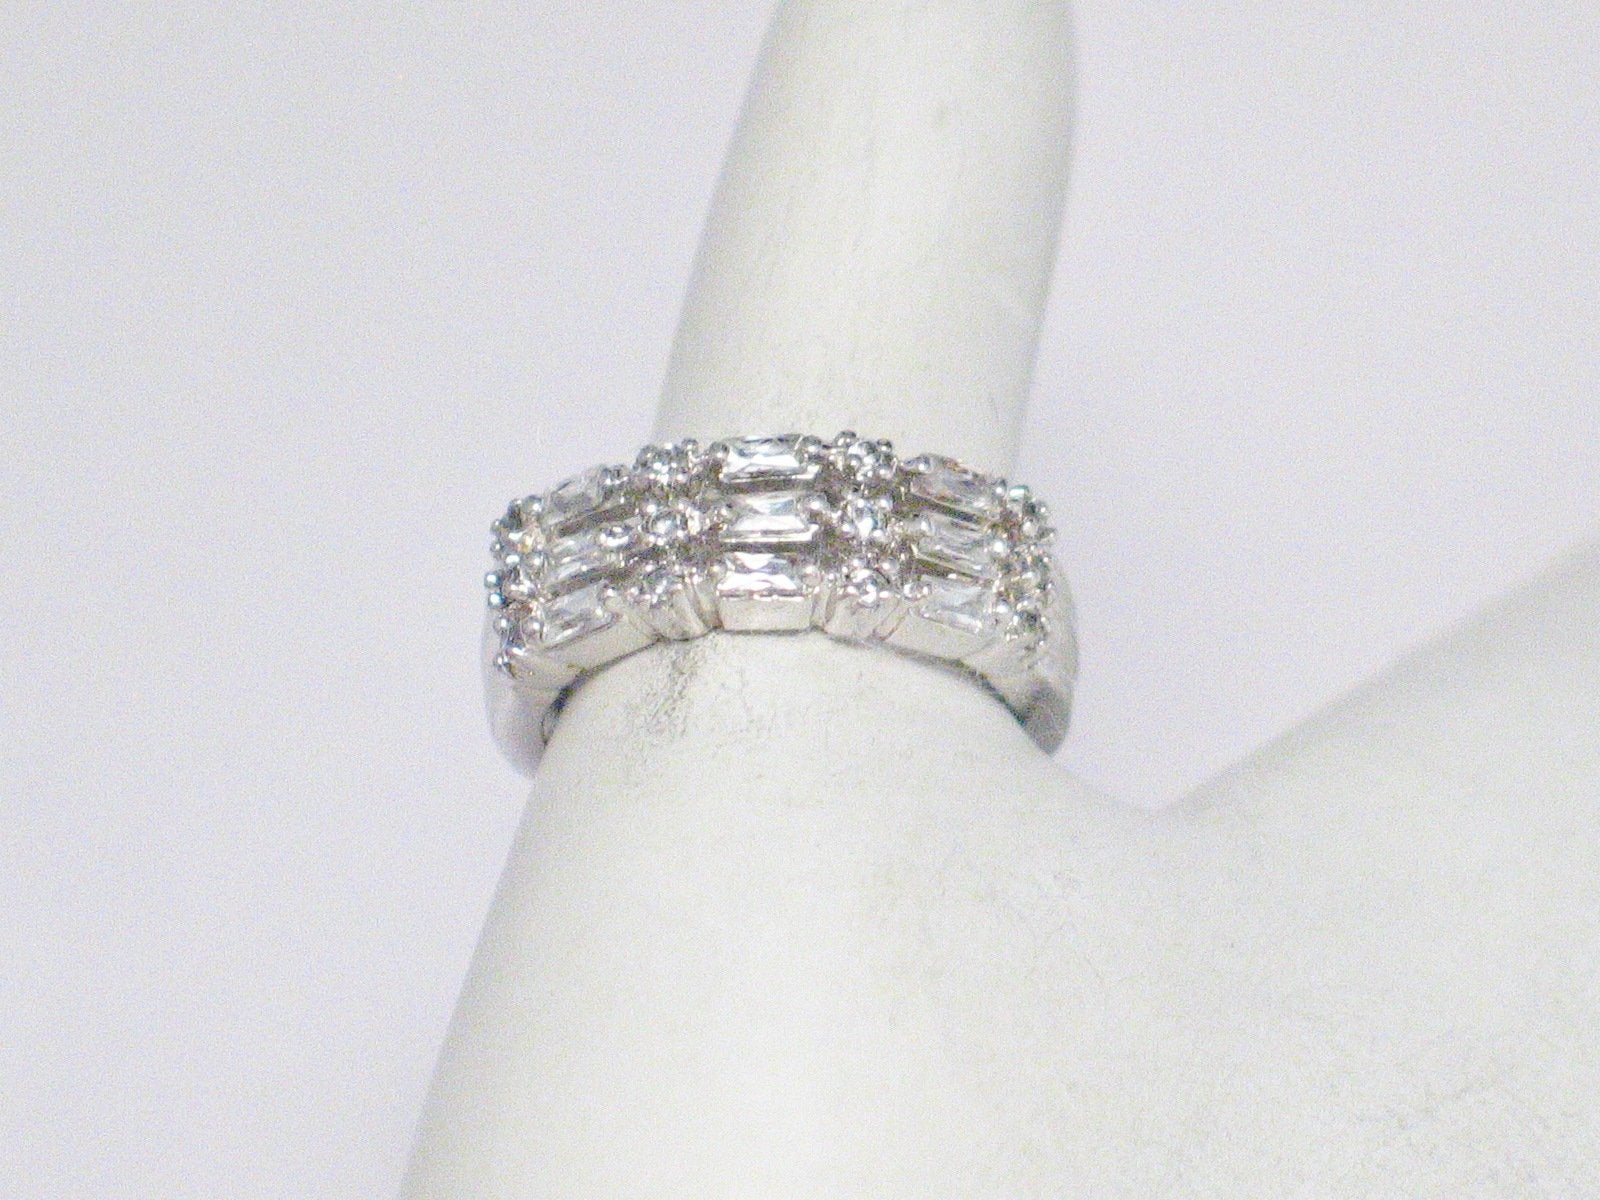 Ring | Womens Sterling Silver White Cubic Zirconia 3 Band Stacker Style Ring 6.25 | Jewelry